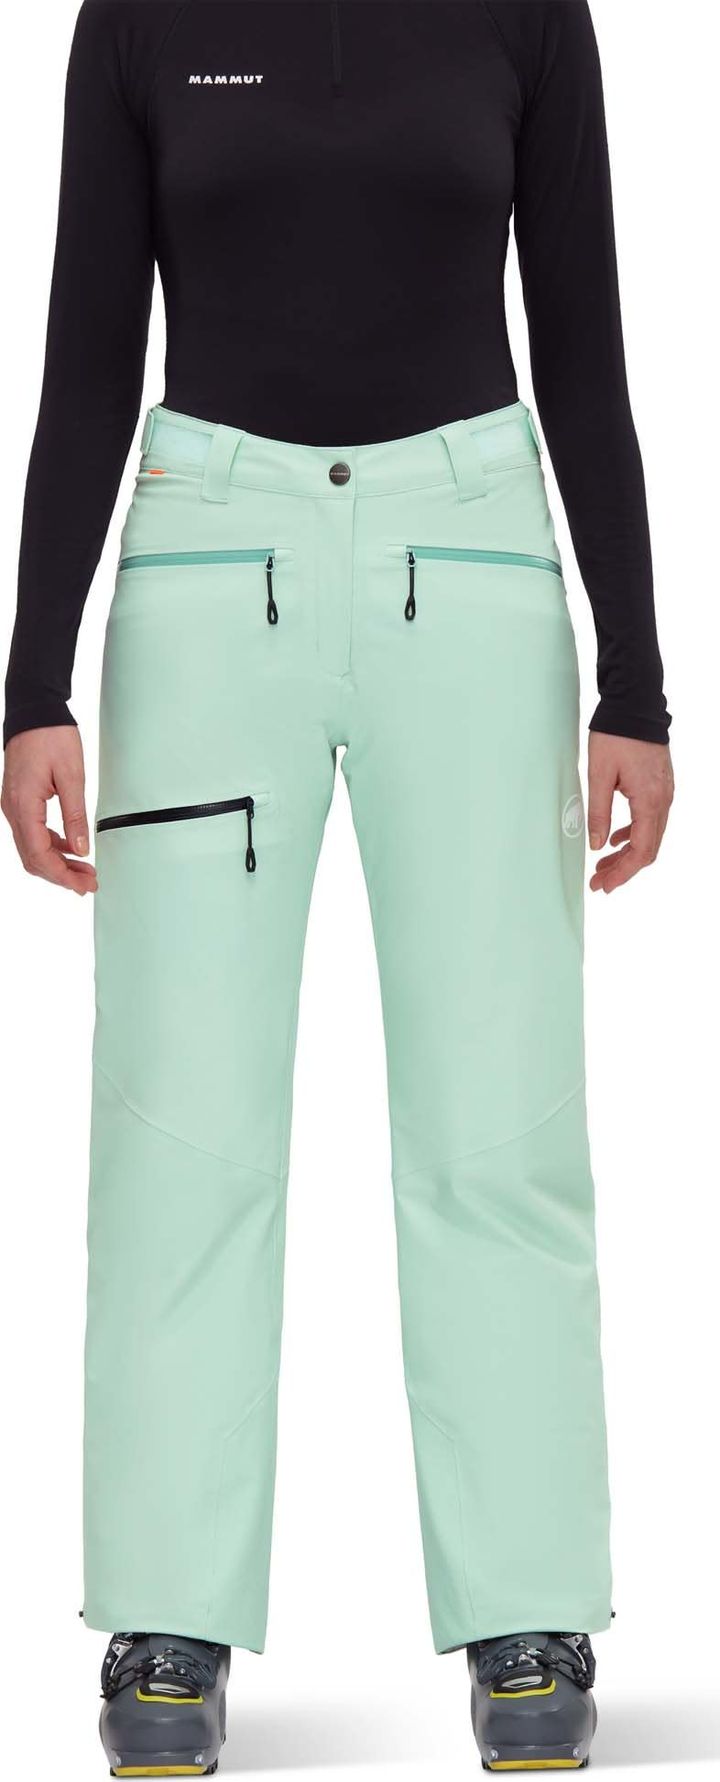 Women's Stoney HS Thermo Pants neo mint